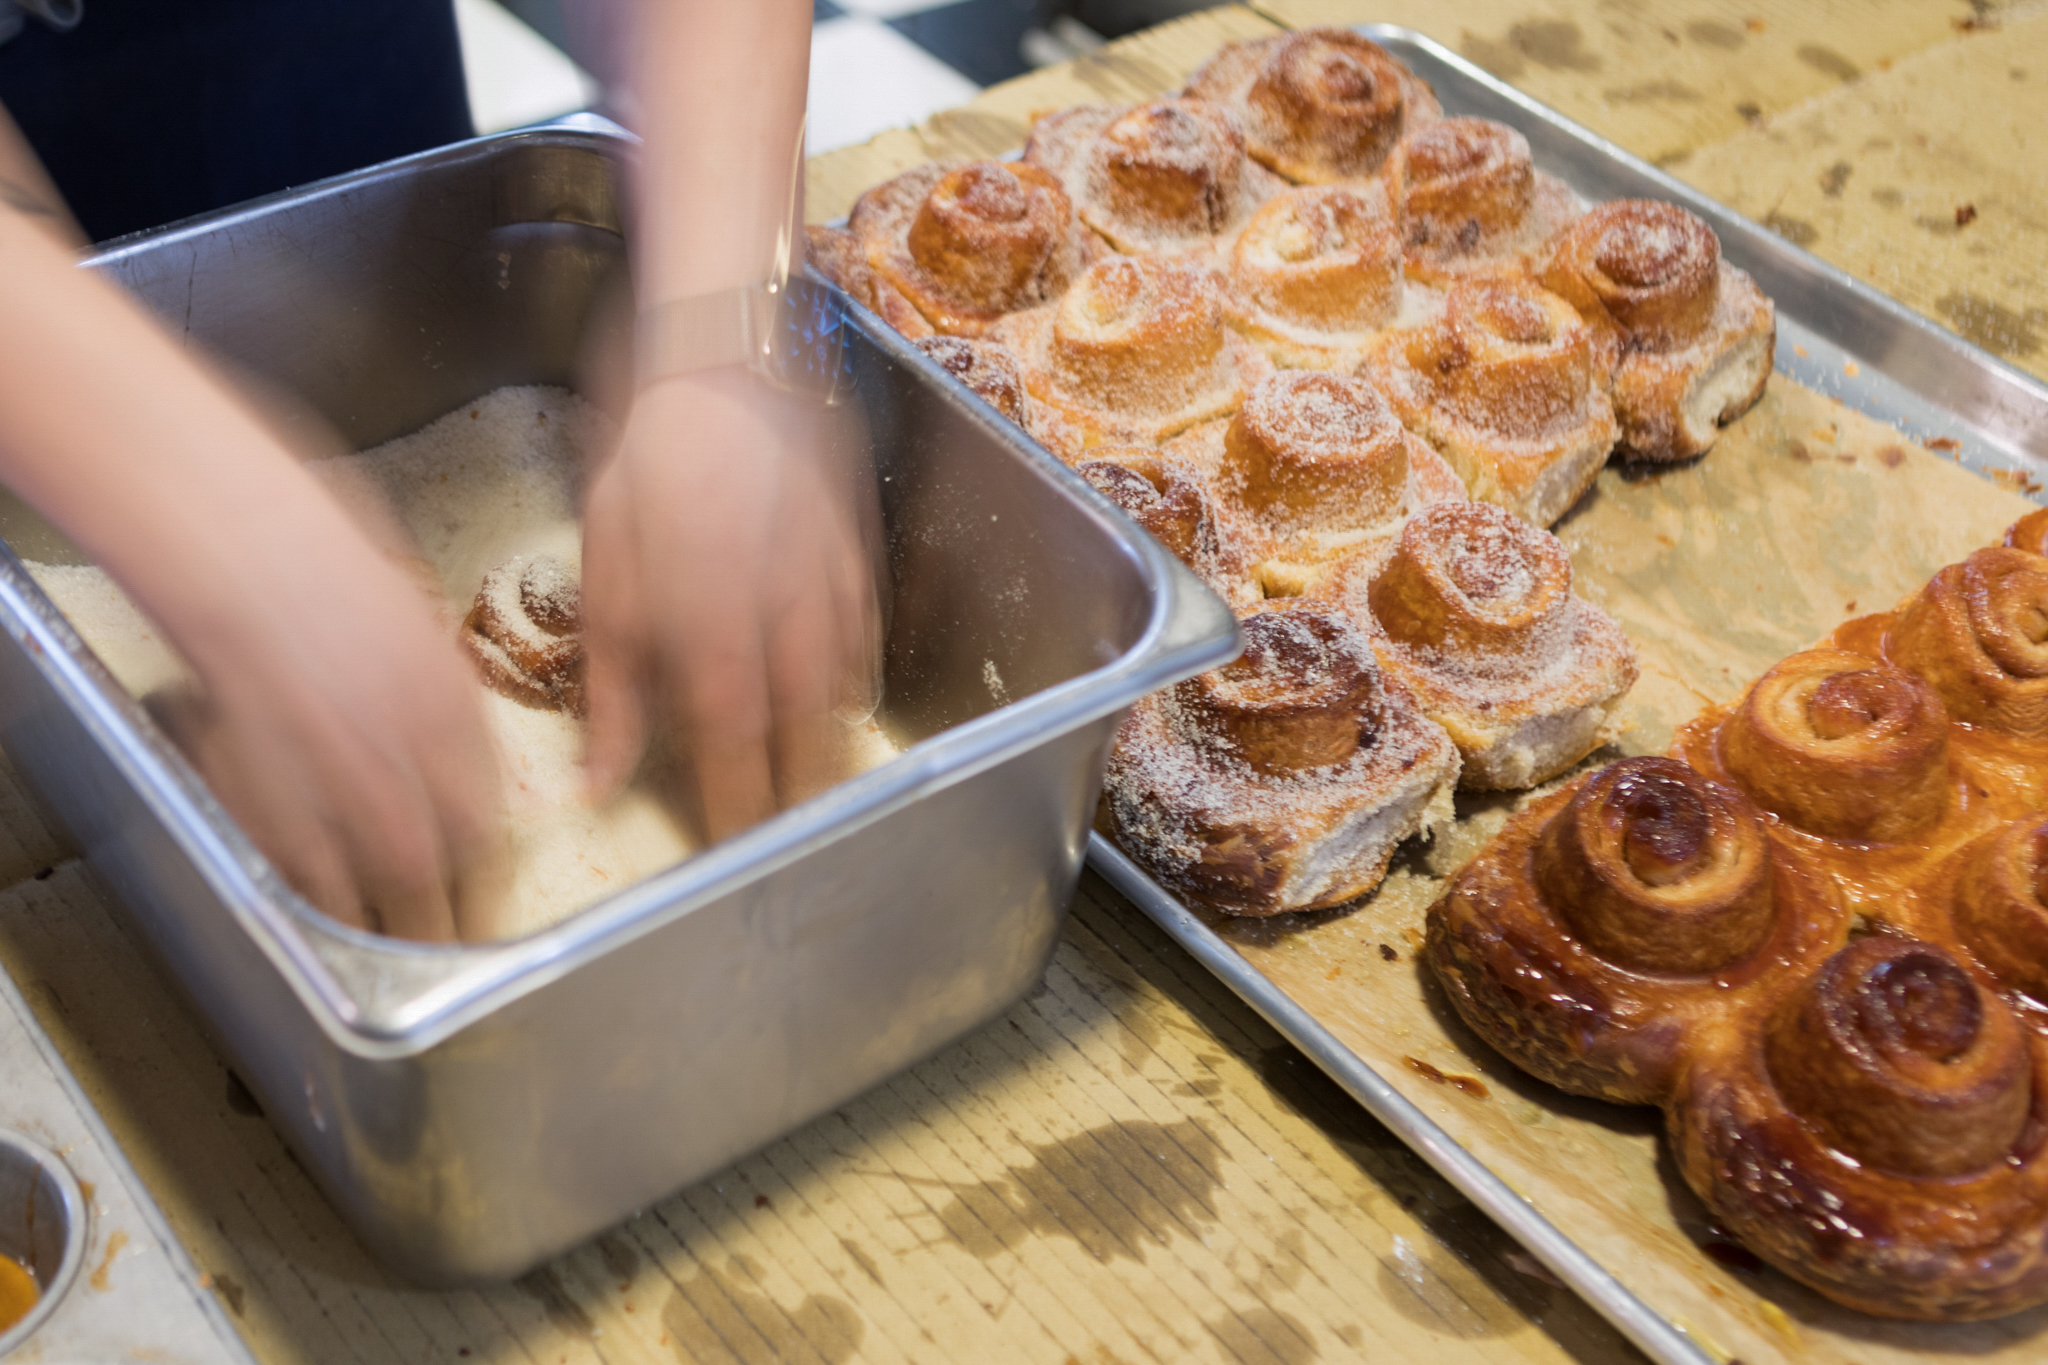 Where have all the professional bakers gone? 3 Bay Area bakeries